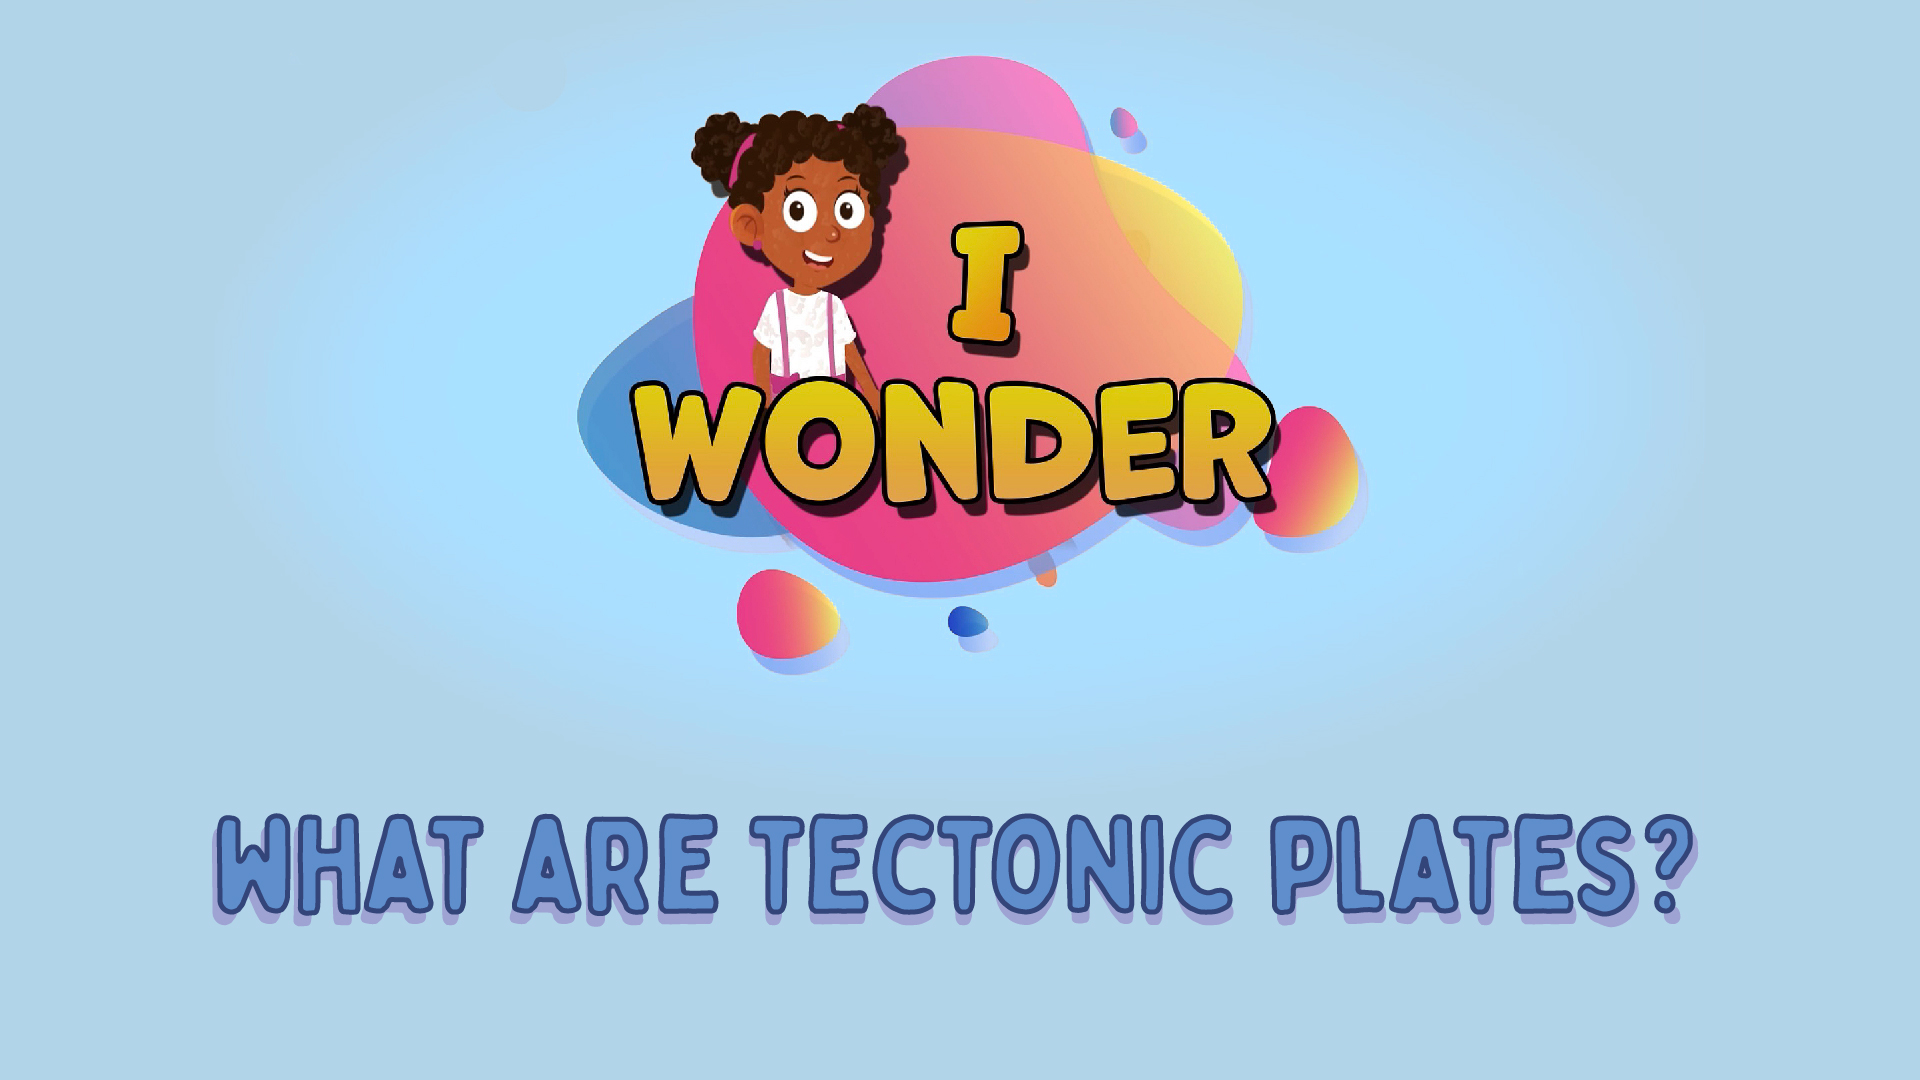 What Are Tectonic Plates?